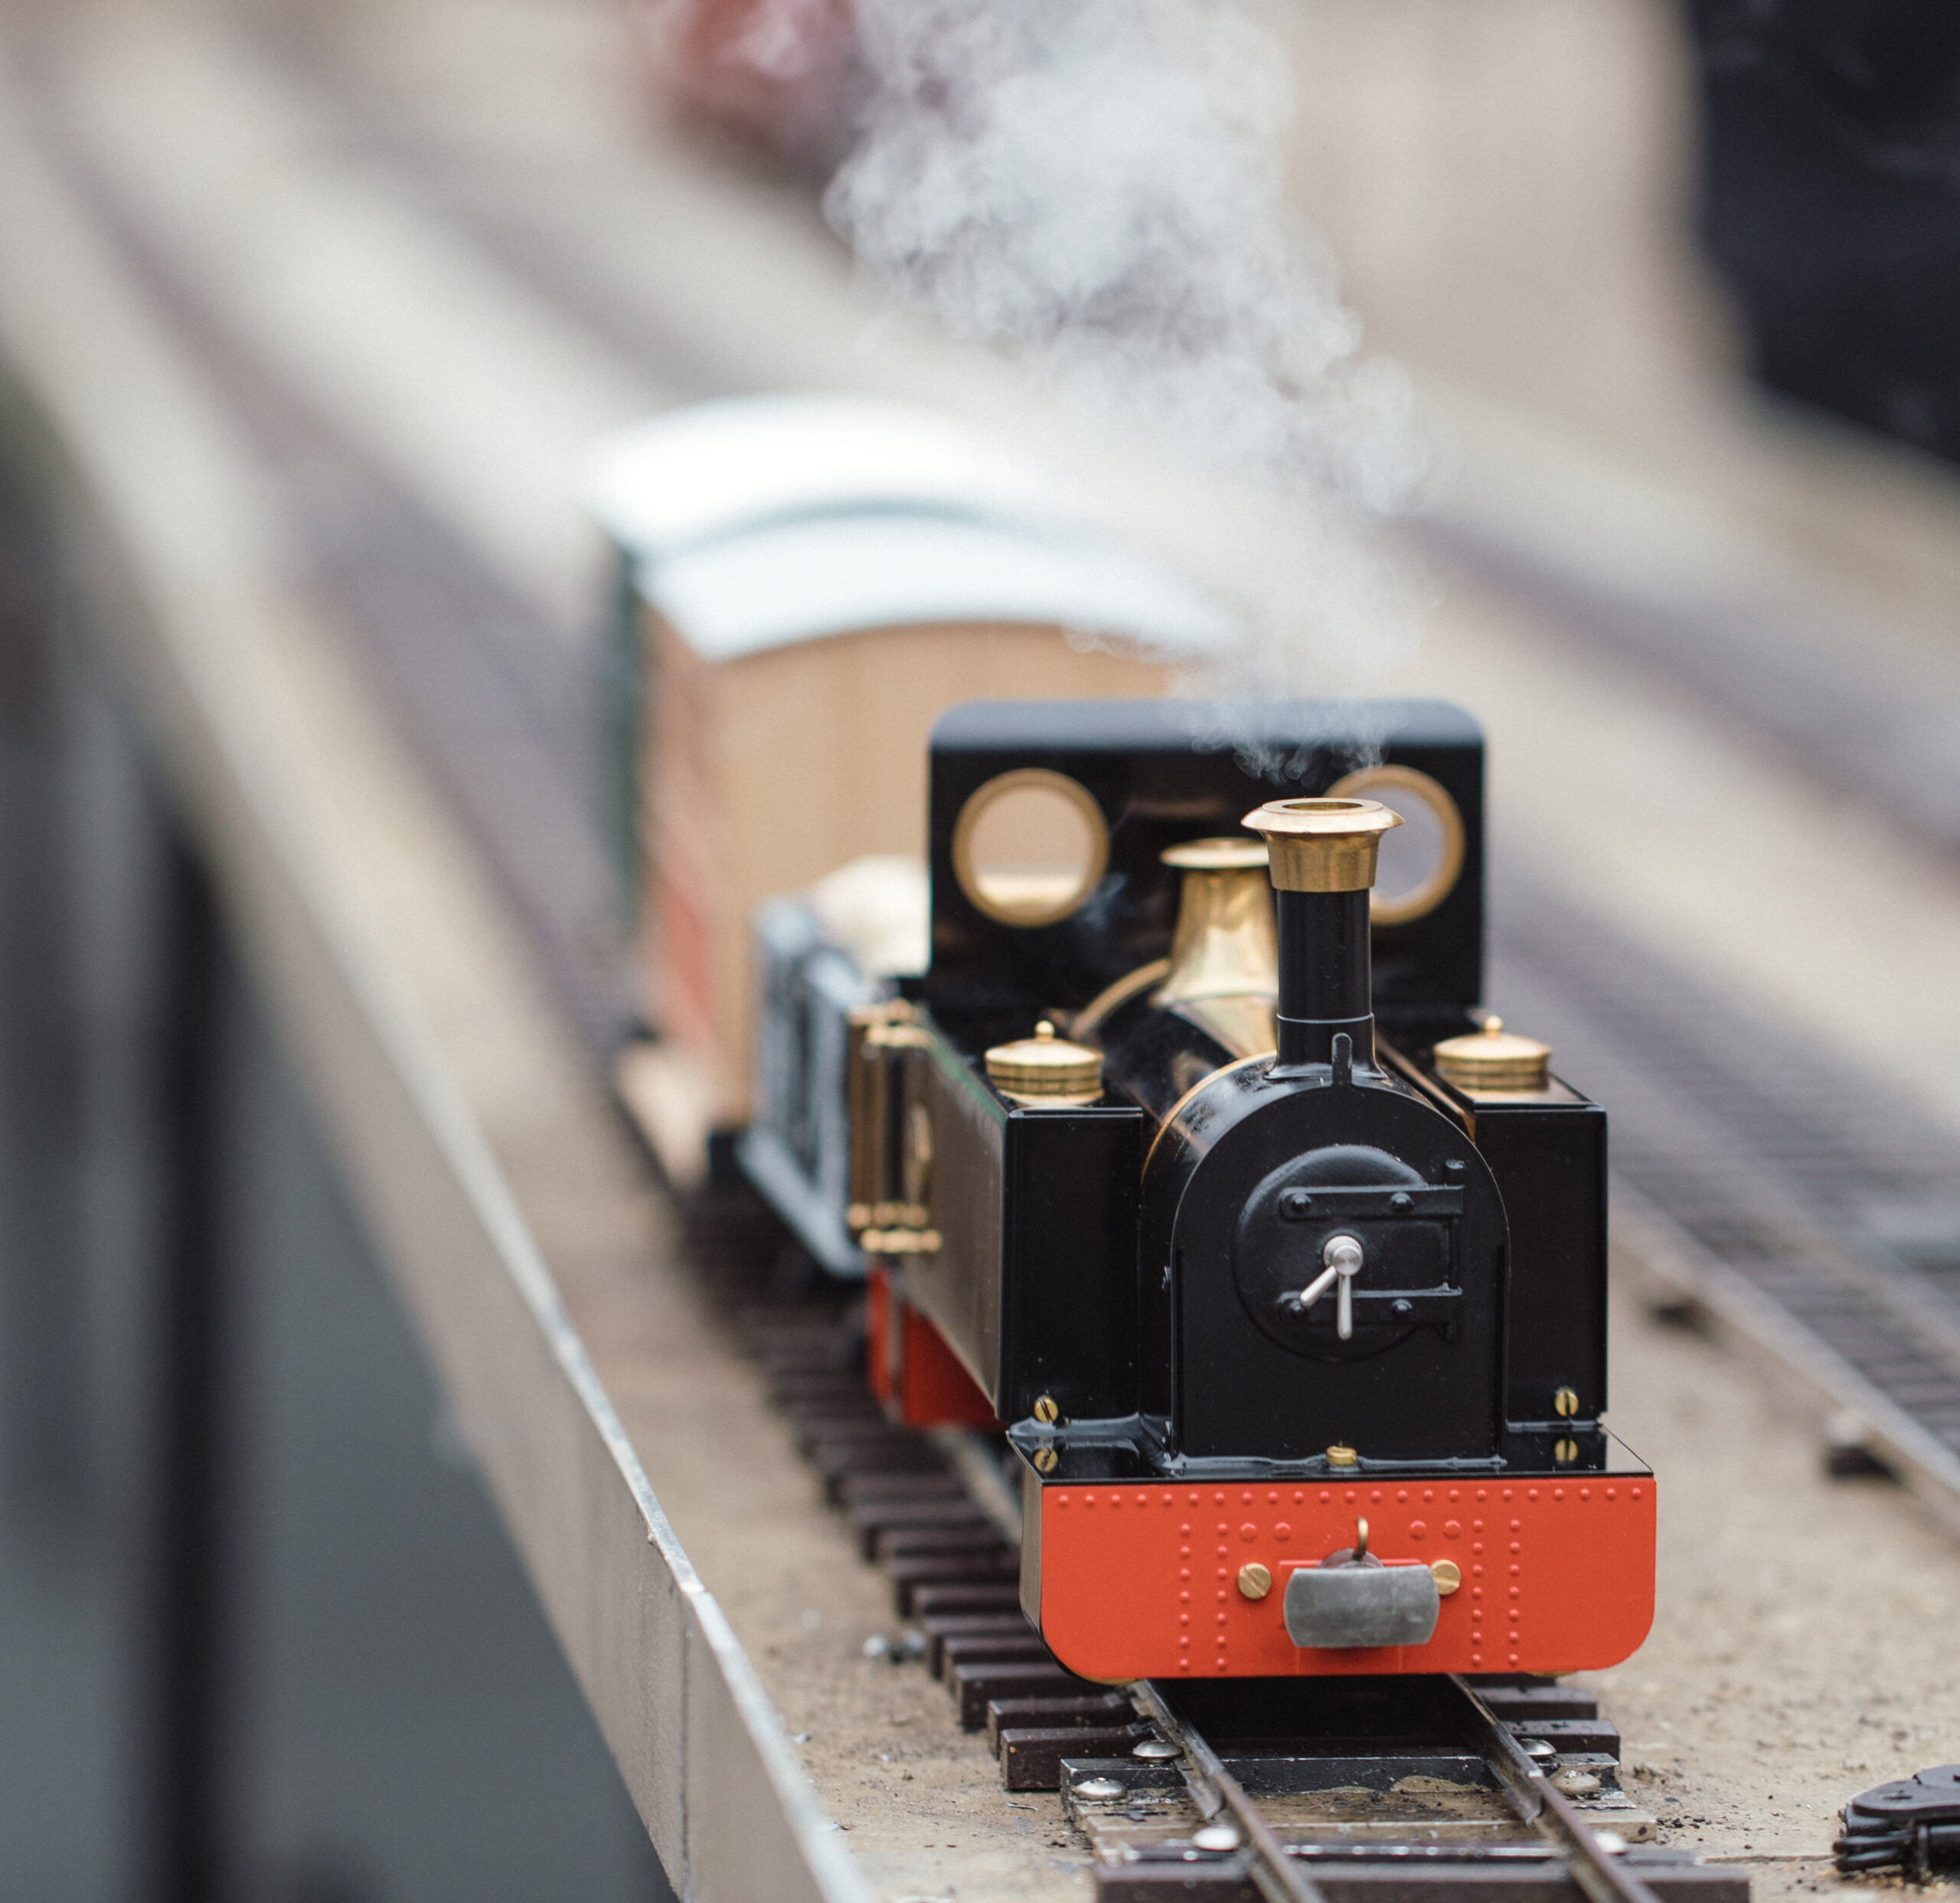 Small model steam engine moving on train tracks